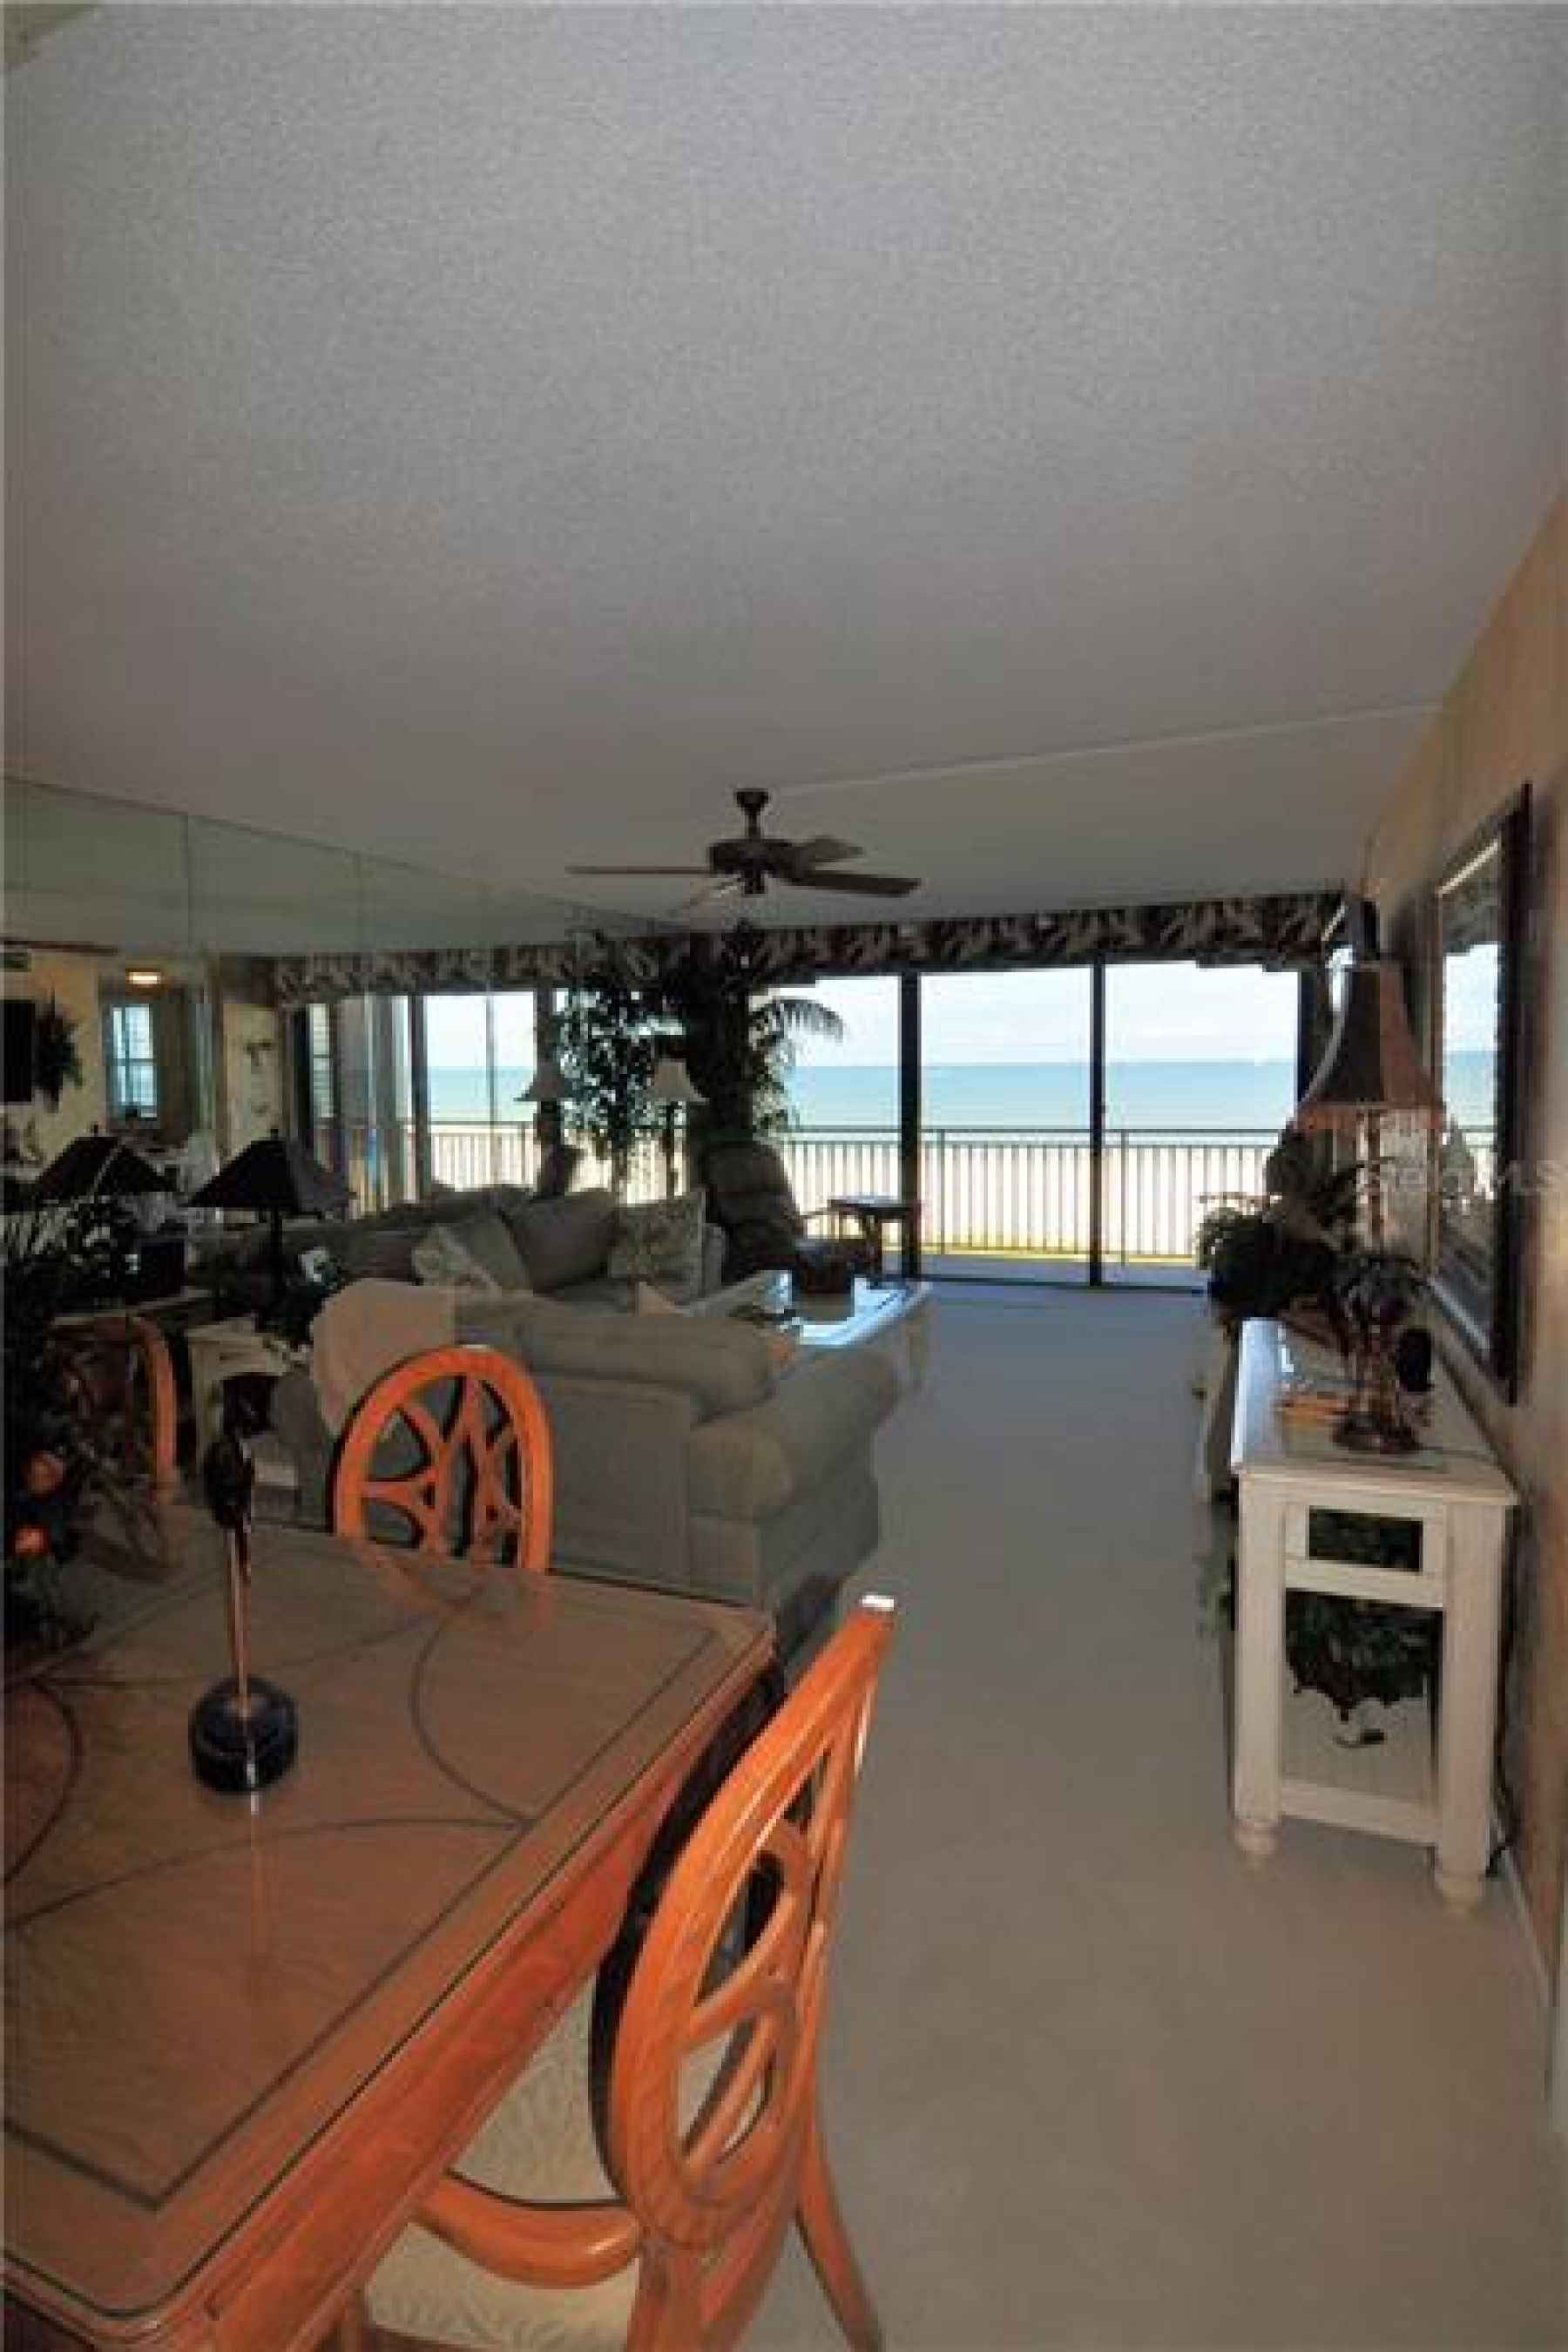 Dining room looking toward the patio and the Gulf of Mexico.